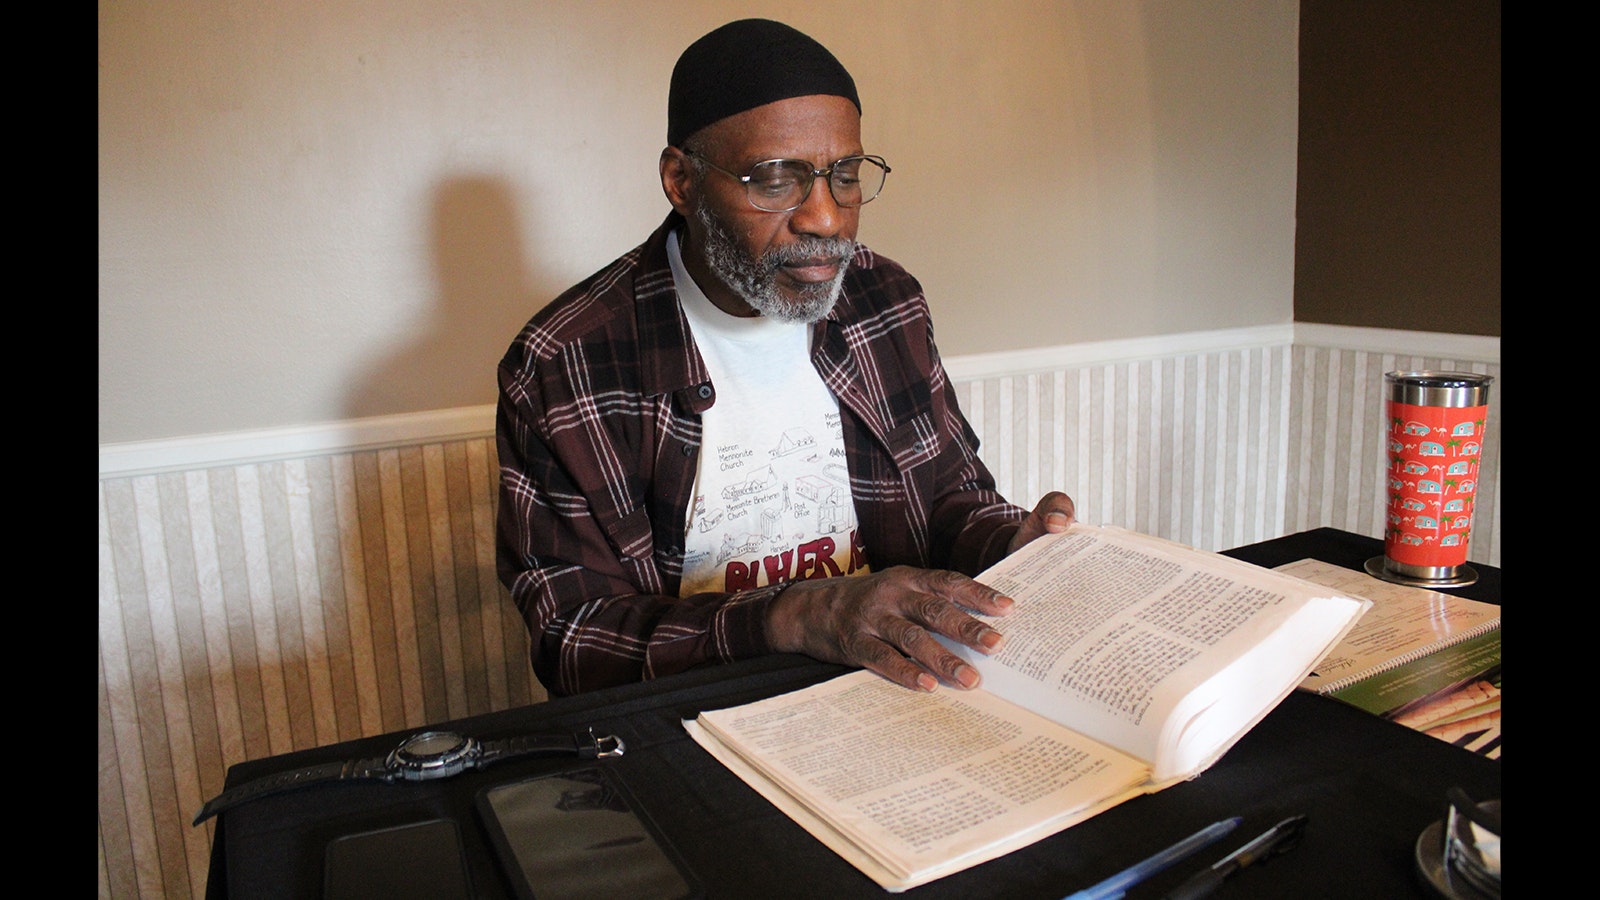 Clarence Fisher reads the Torah at a local Cheyenne coffee shop. He said finding God saved his soul and changed his perspective on life.